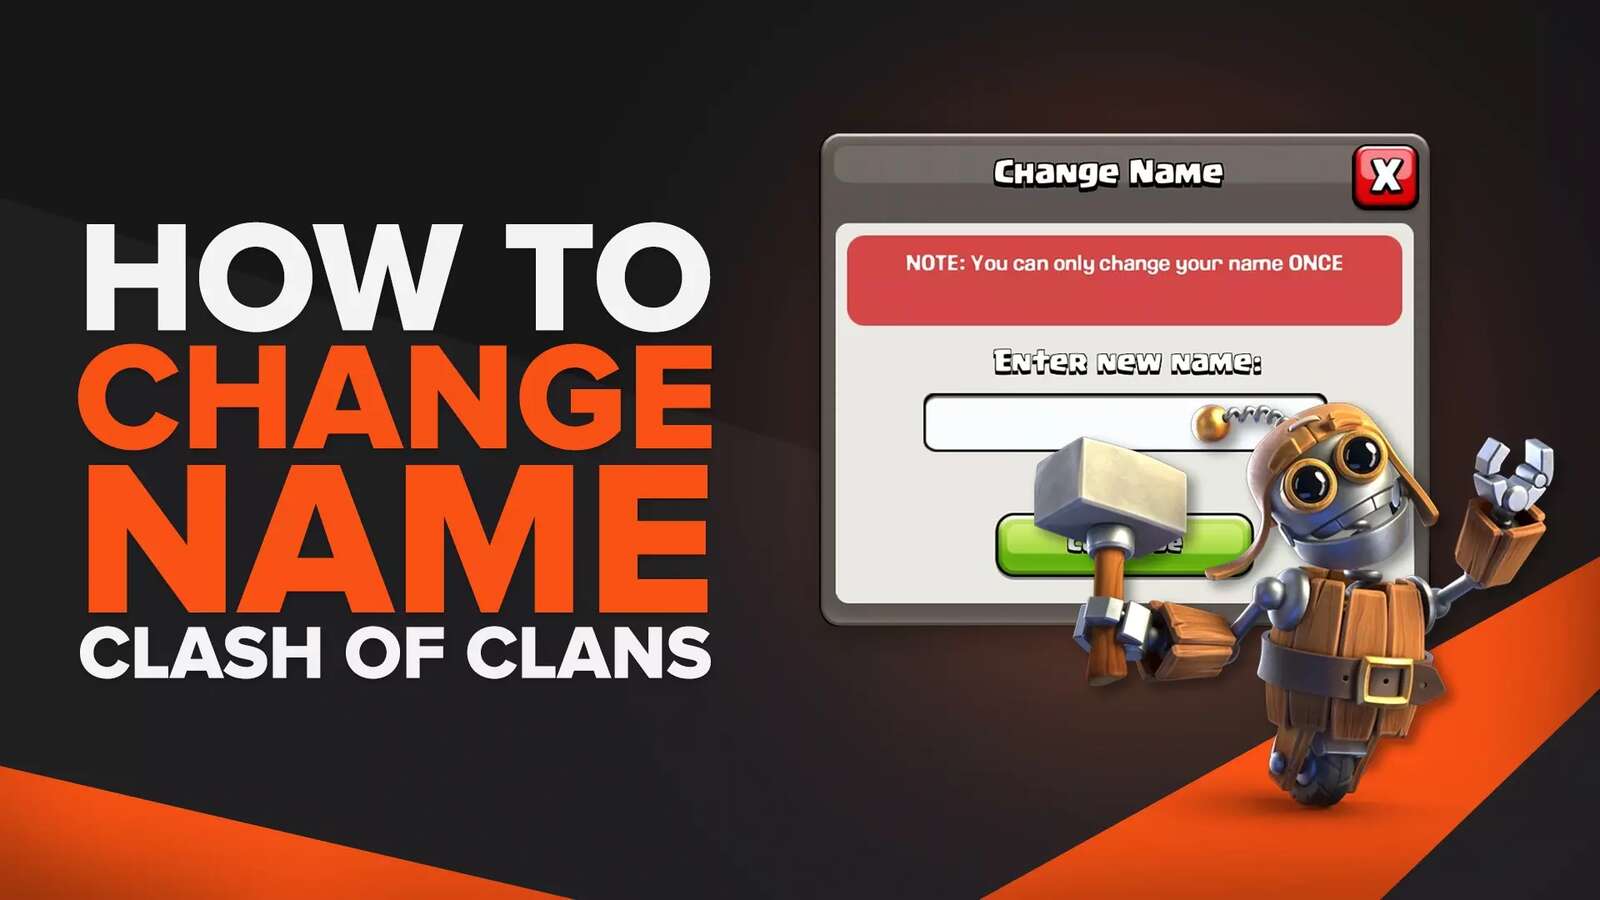 How To Change Your Name In Clash of Clans